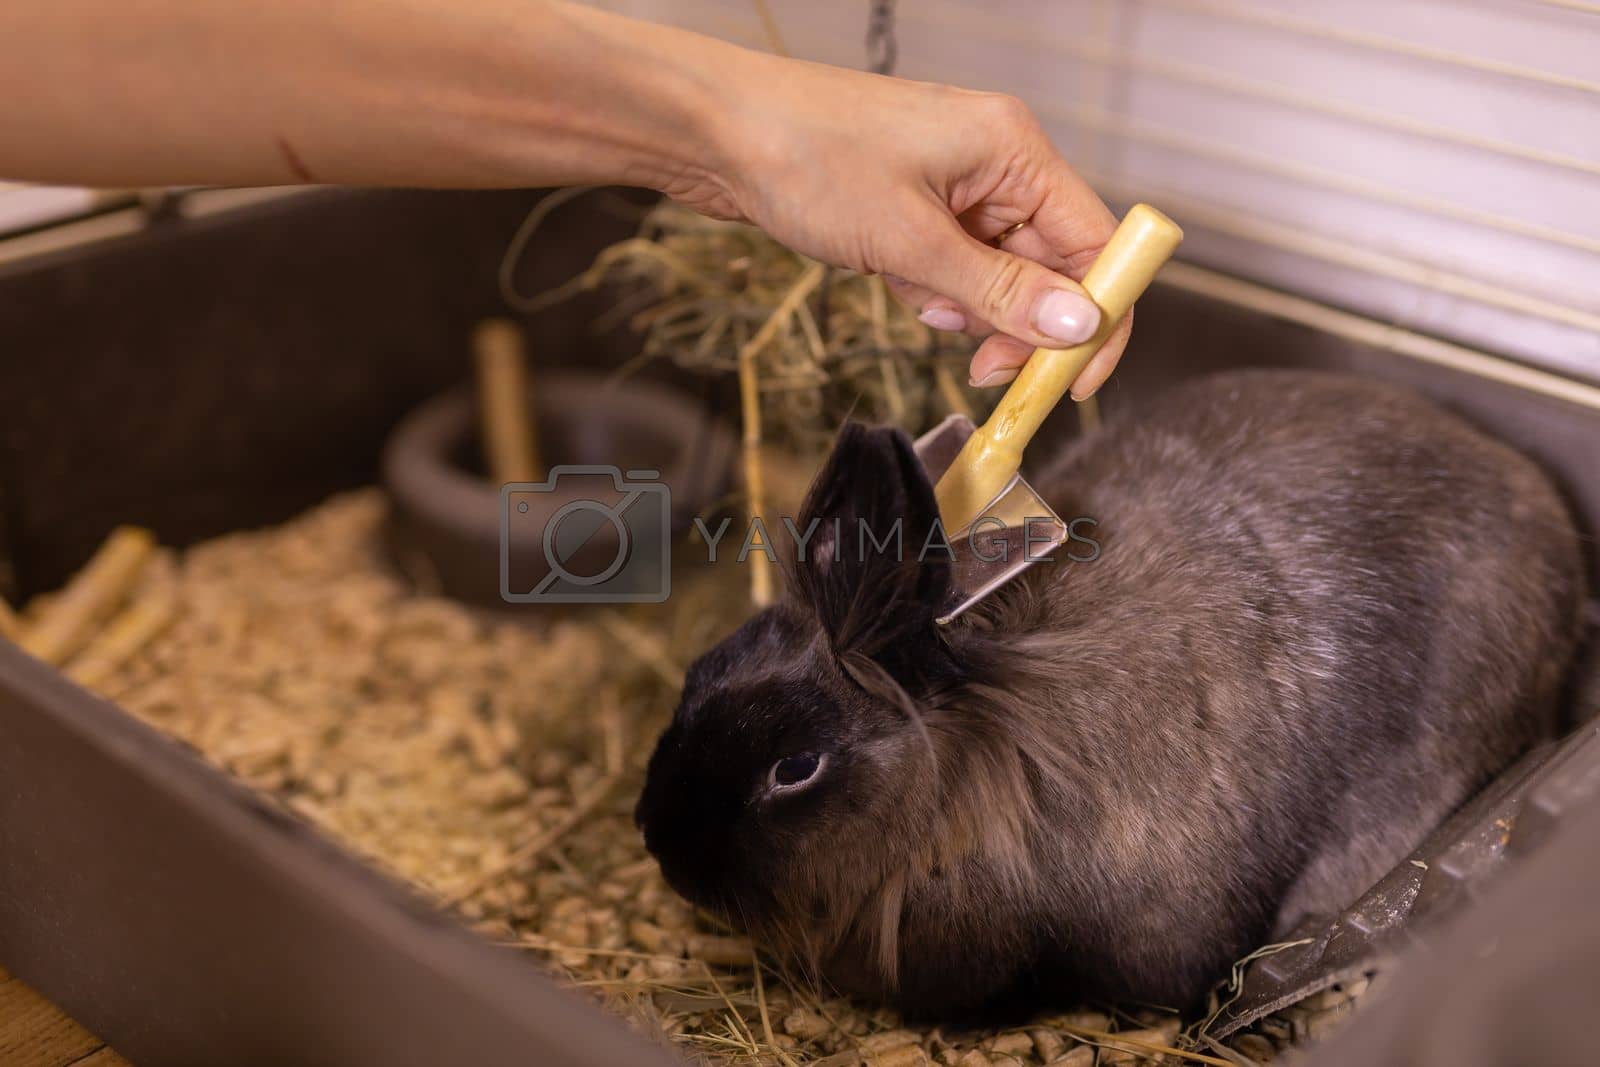 Royalty free image of Grooming undercoat of bunny rabbit. Combing out rabbit fur brush. Hygiene and care for animals concept by Satura86